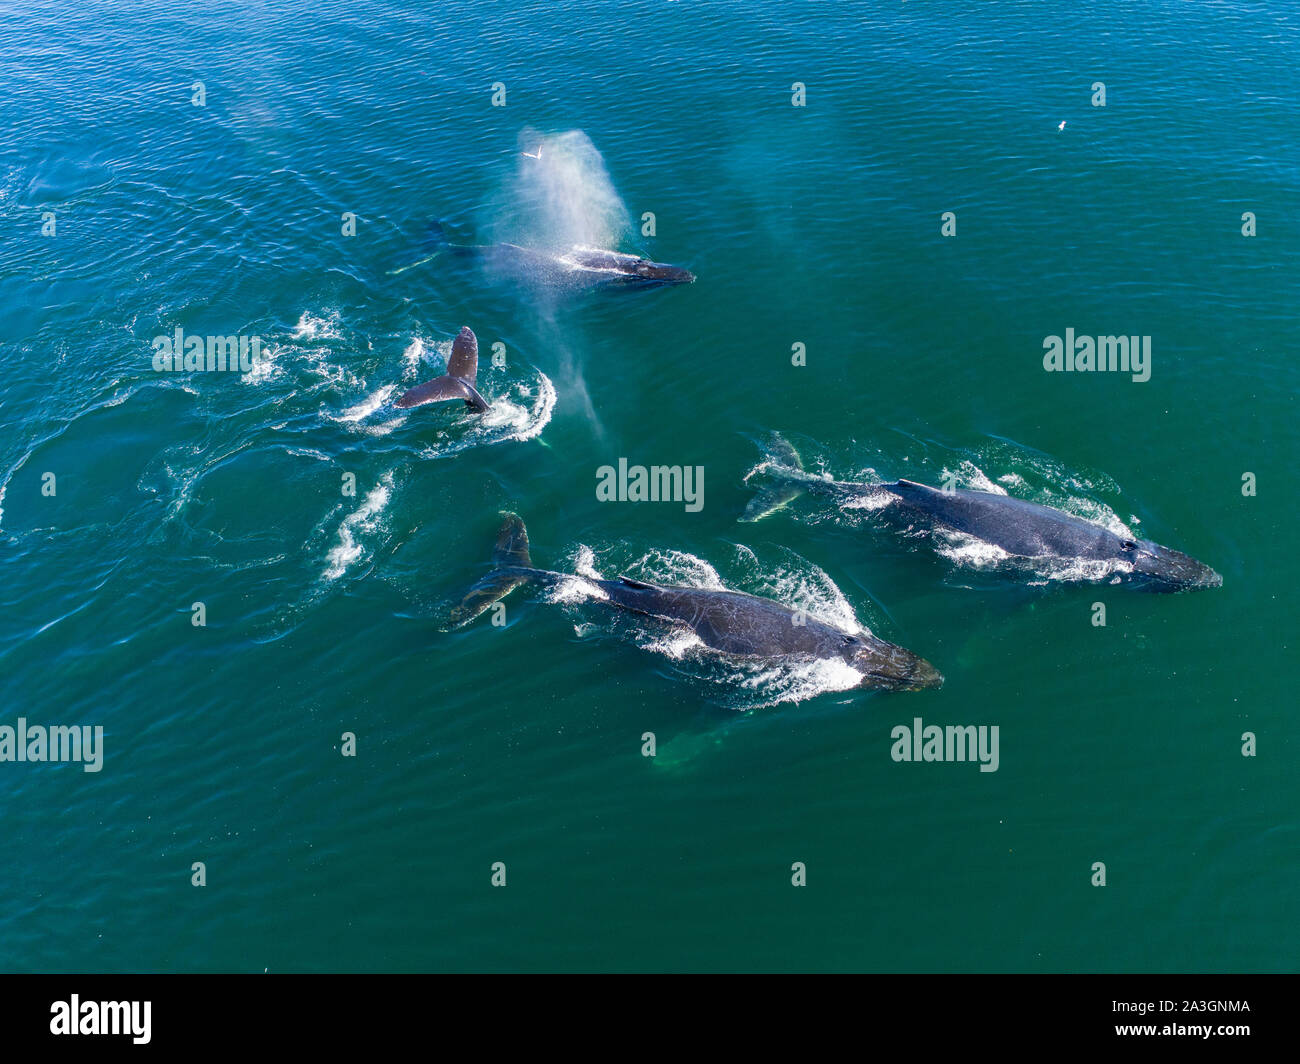 USA, Alaska, Aerial view of Humpback Whales (Megaptera novaeangliae) swimming at surface of Frederick Sound while bubble net feeding on herring shoal Stock Photo